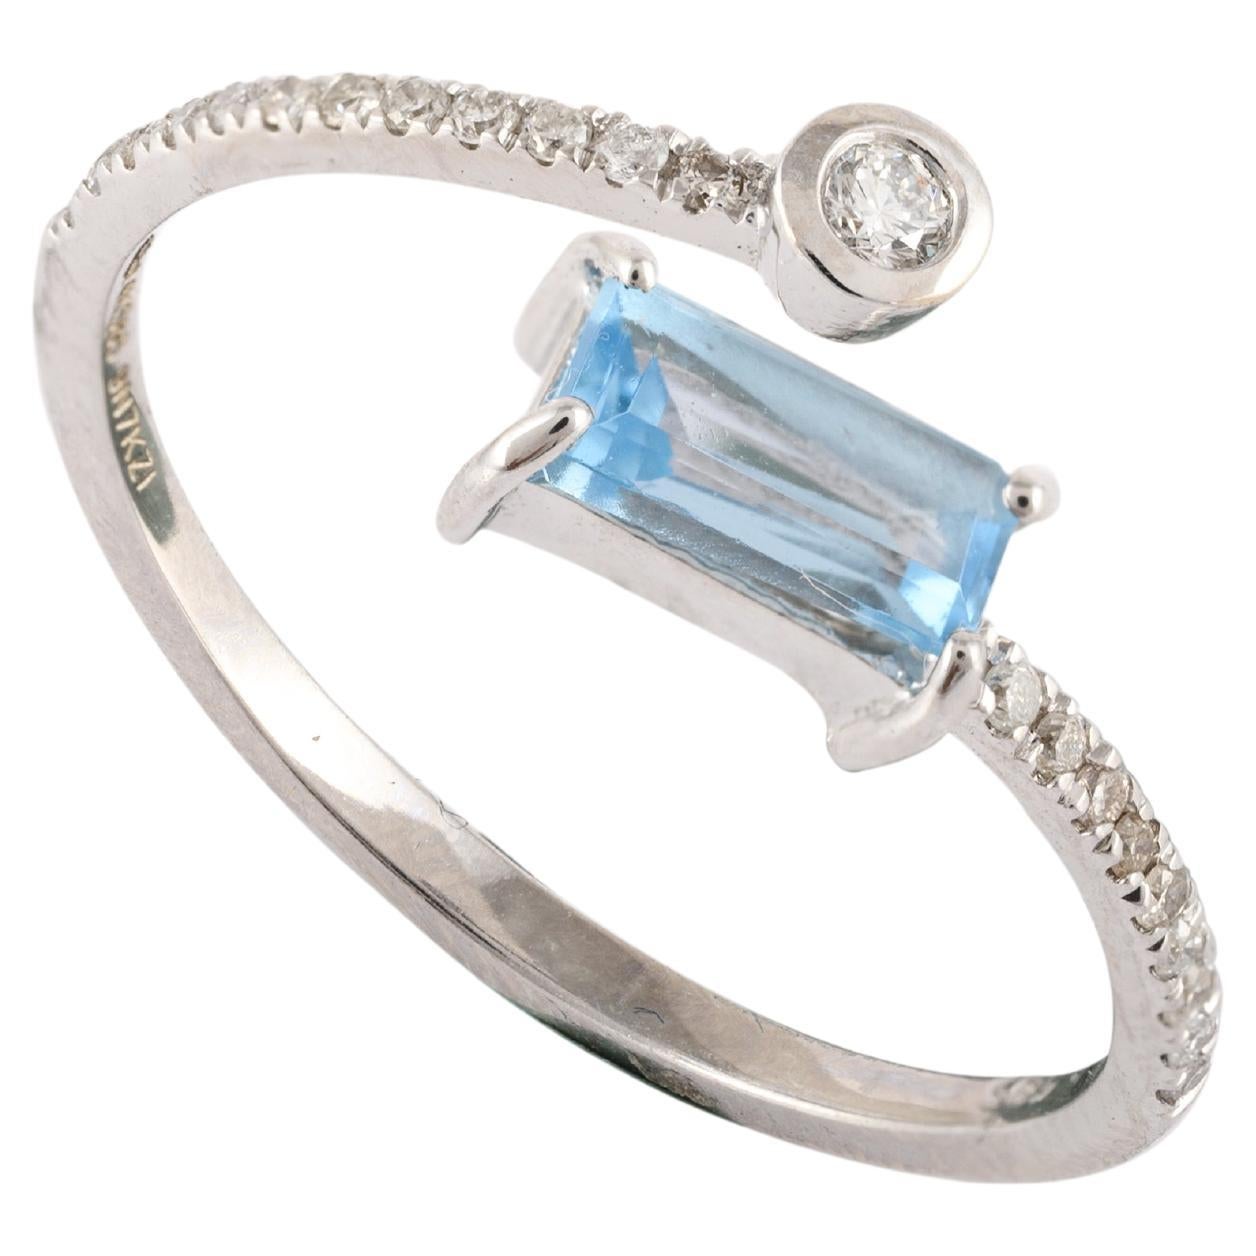 Blue Topaz and Diamond Wrap Ring For Her in 14kt Solid White Gold